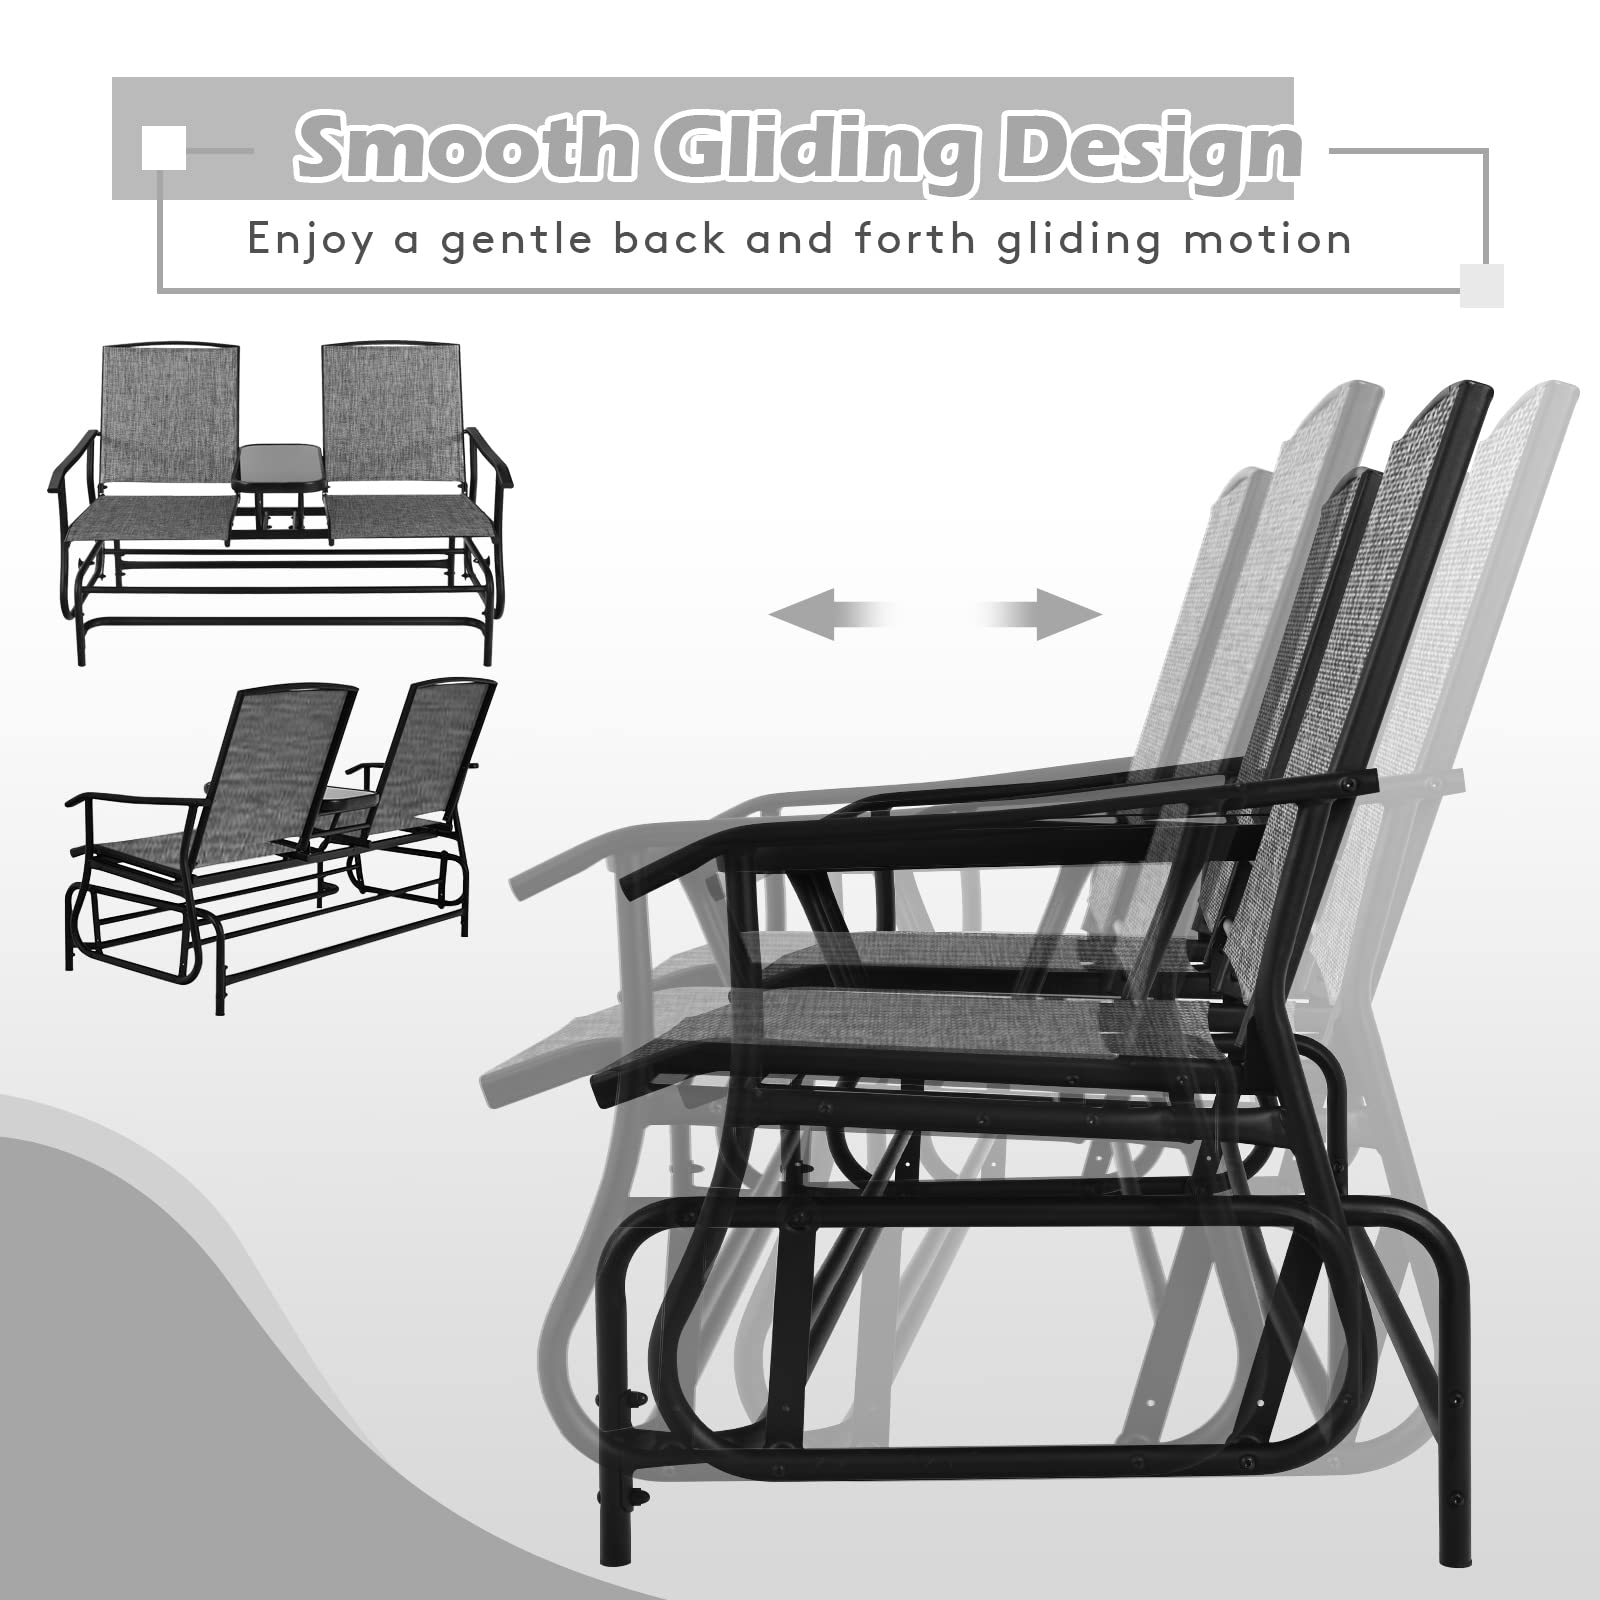 Tangkula 2 Person Swing Glider Chair, Patio Rocking Loveseat w/Center Tempered Glass Table, Outdoor Swing Bench w/Steel Frame & Breathable Mesh Fabric for Porch, Balcony, Poolside  (Grey)